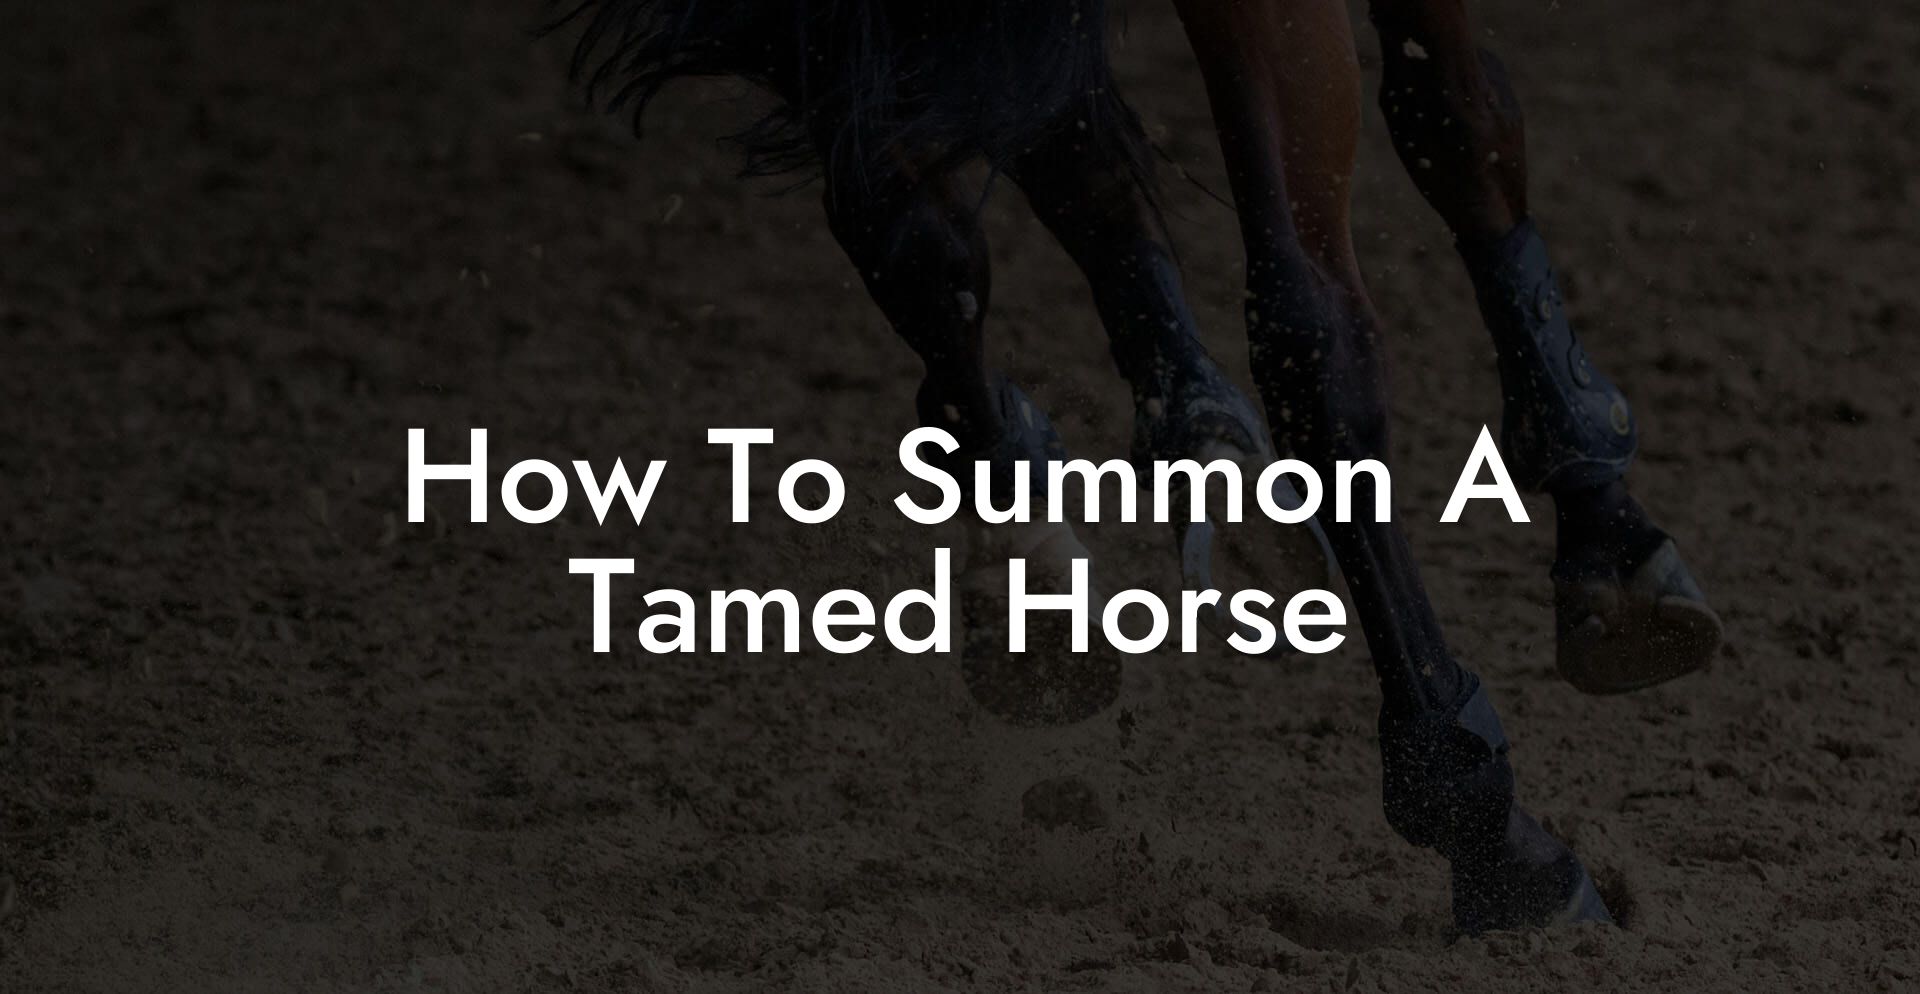 How To Summon A Tamed Horse